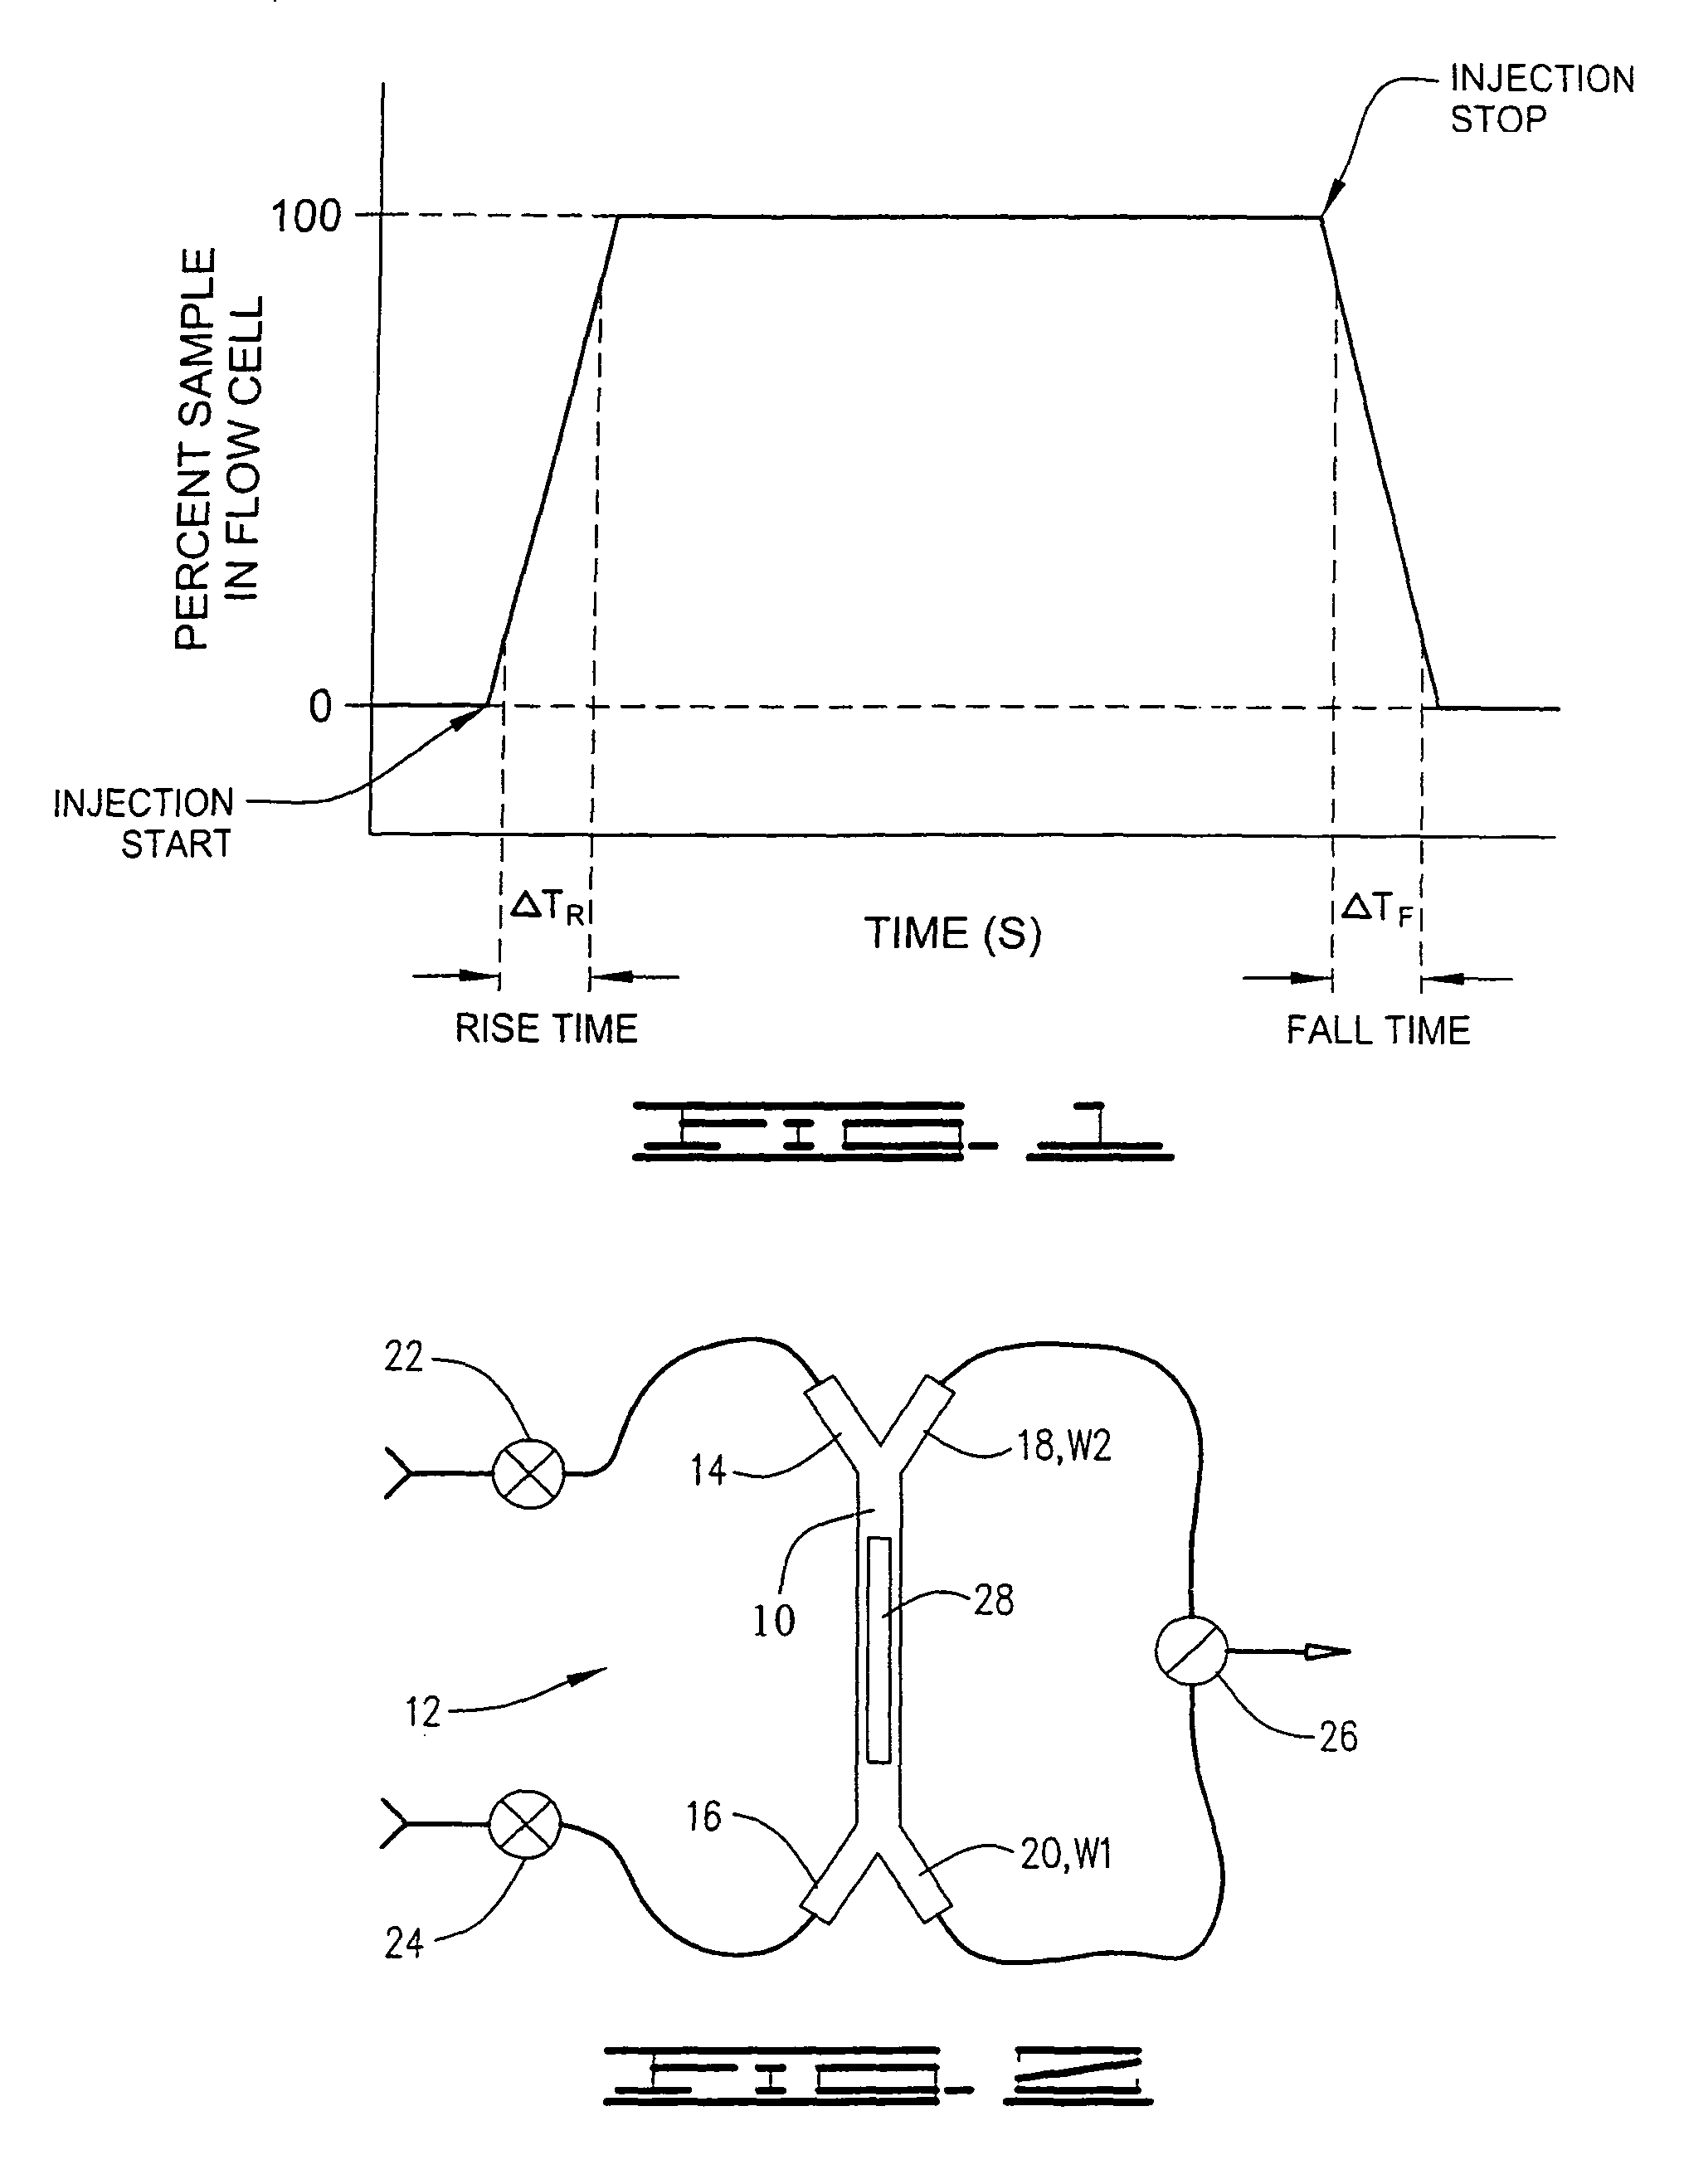 Fluidic configuration for flow injection analysis